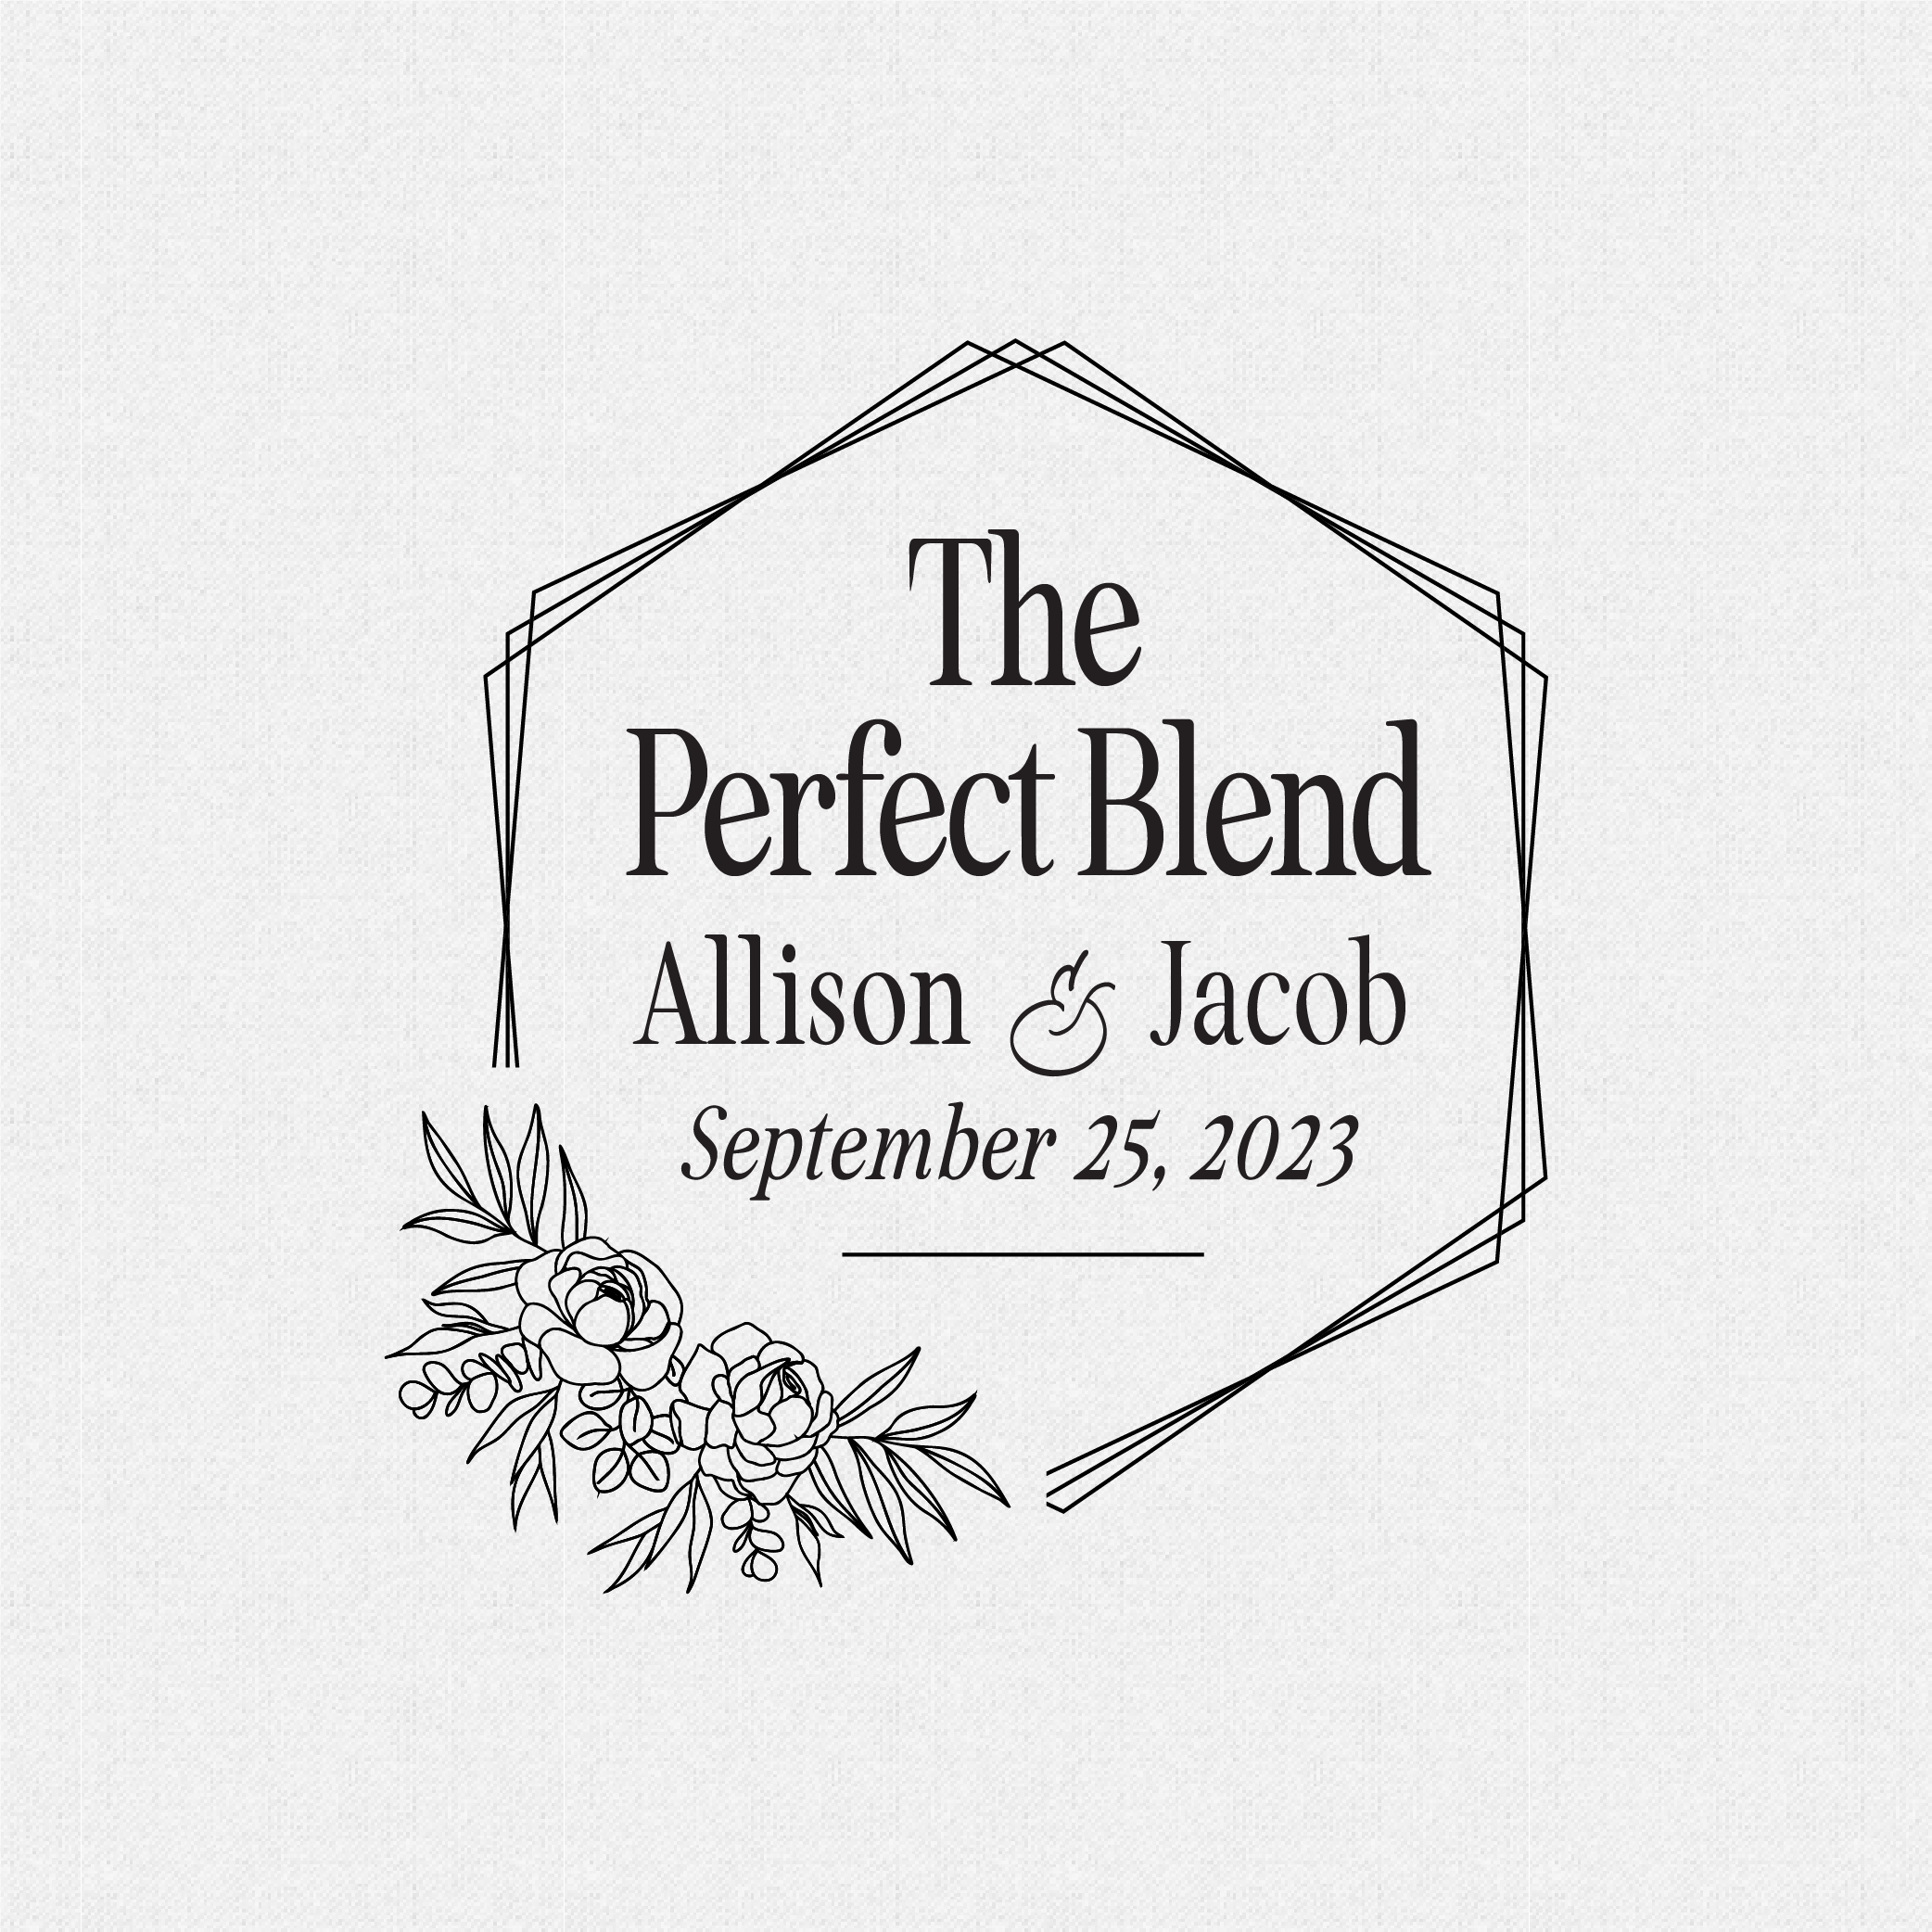 Personalized Custom The Perfect Blend Wedding Favor Rubber Stamp Hexagon with Peonies for Coffee Wedding Favors, Coffee Bags, Coffee Drinks - Style T#473